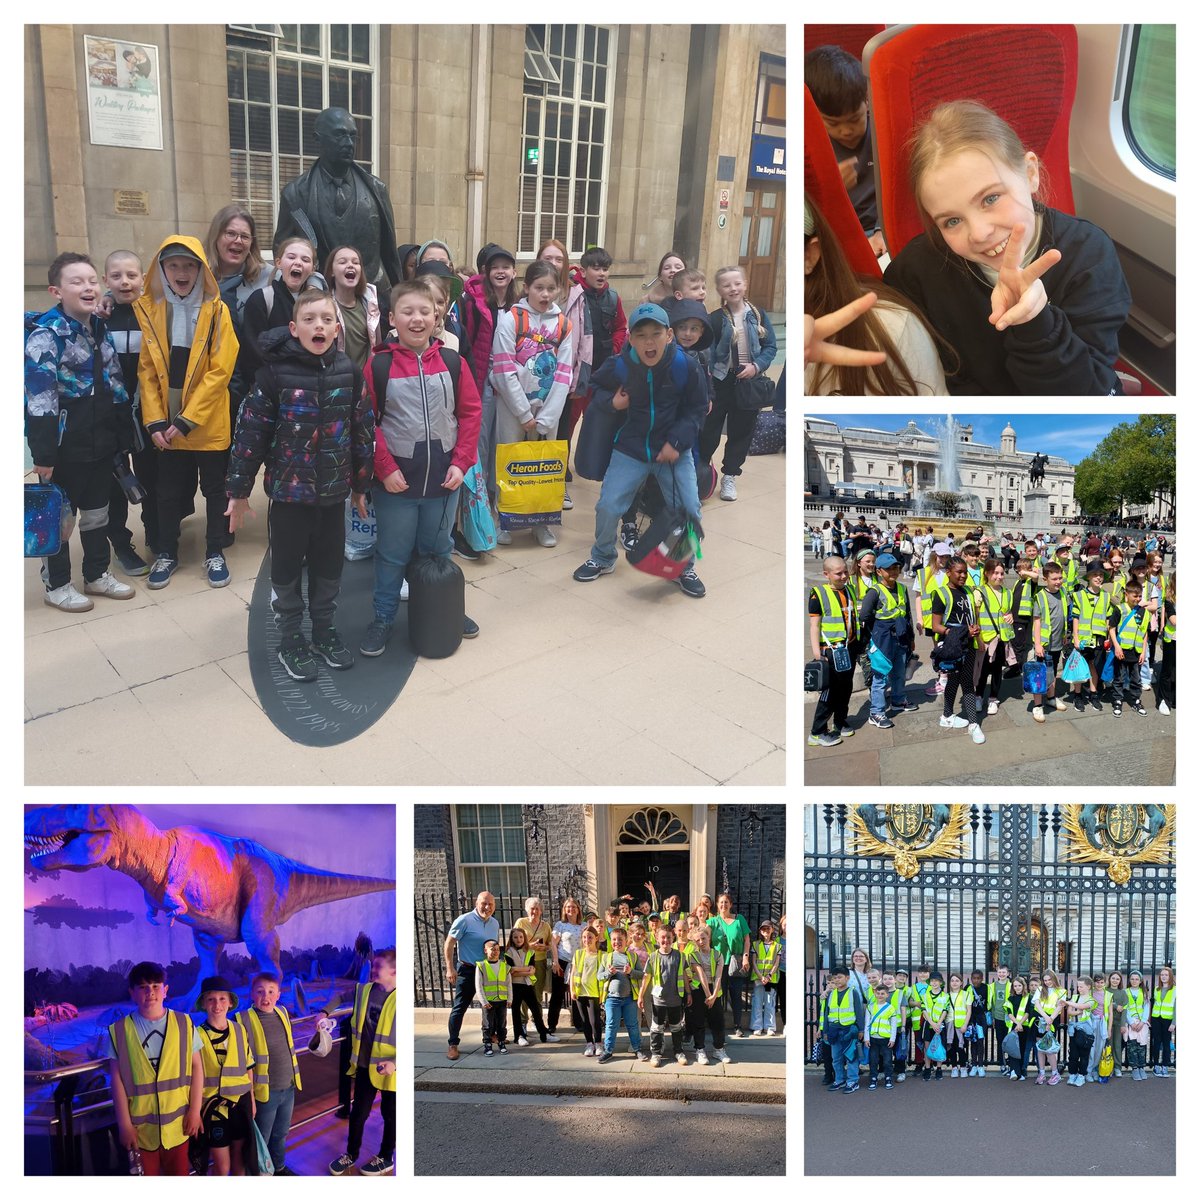 A fantastic couple of days with Yr5 @AinthorpeSchool on their London kip on a ship experience sleeping on HMS Belfast, we have walked miles and seen all the famous sights on a river Thames cruise, we've visited NHM, Parliament, the Tower of London and visited the famous door.